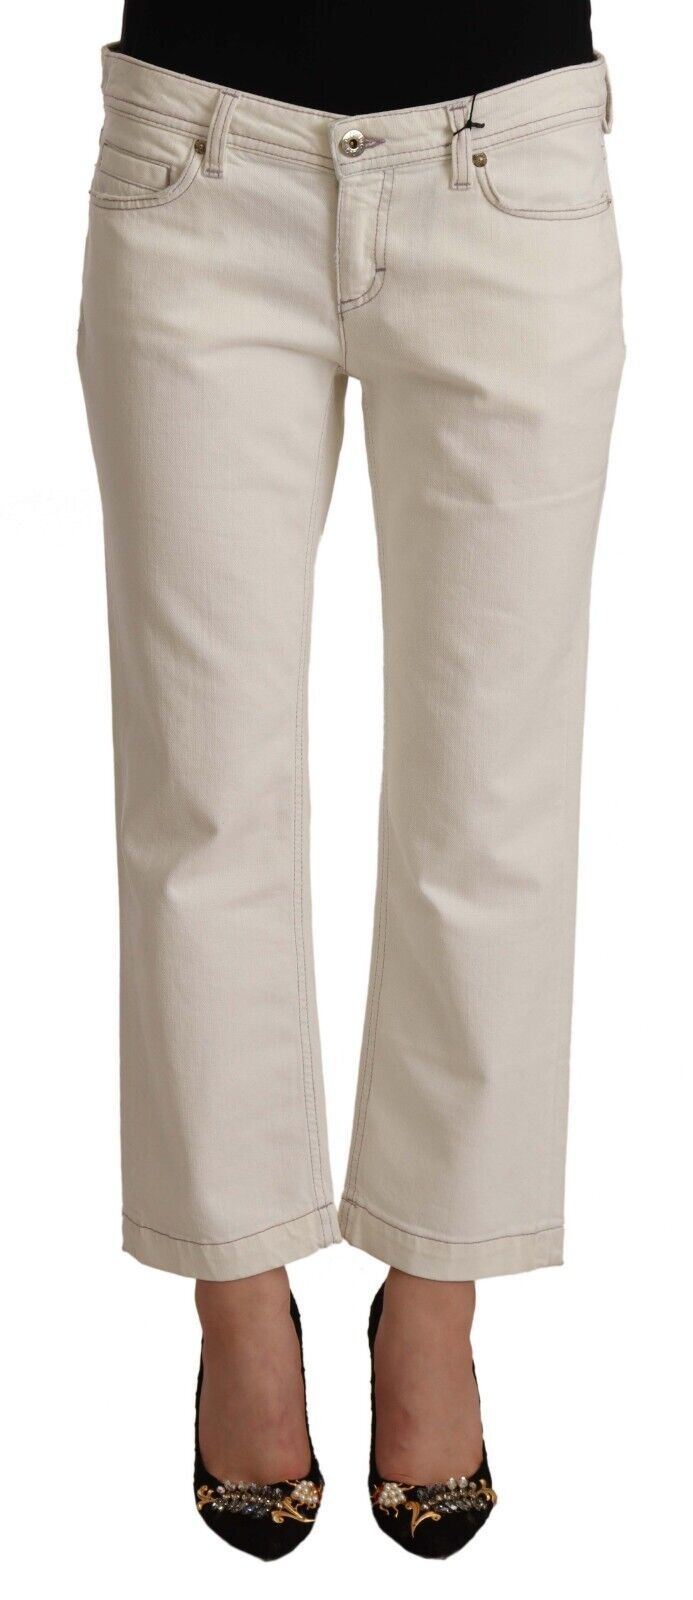 Dolce & Gabbana Chic Off-White Cropped Jeans - Fashionista Women's Must-Have